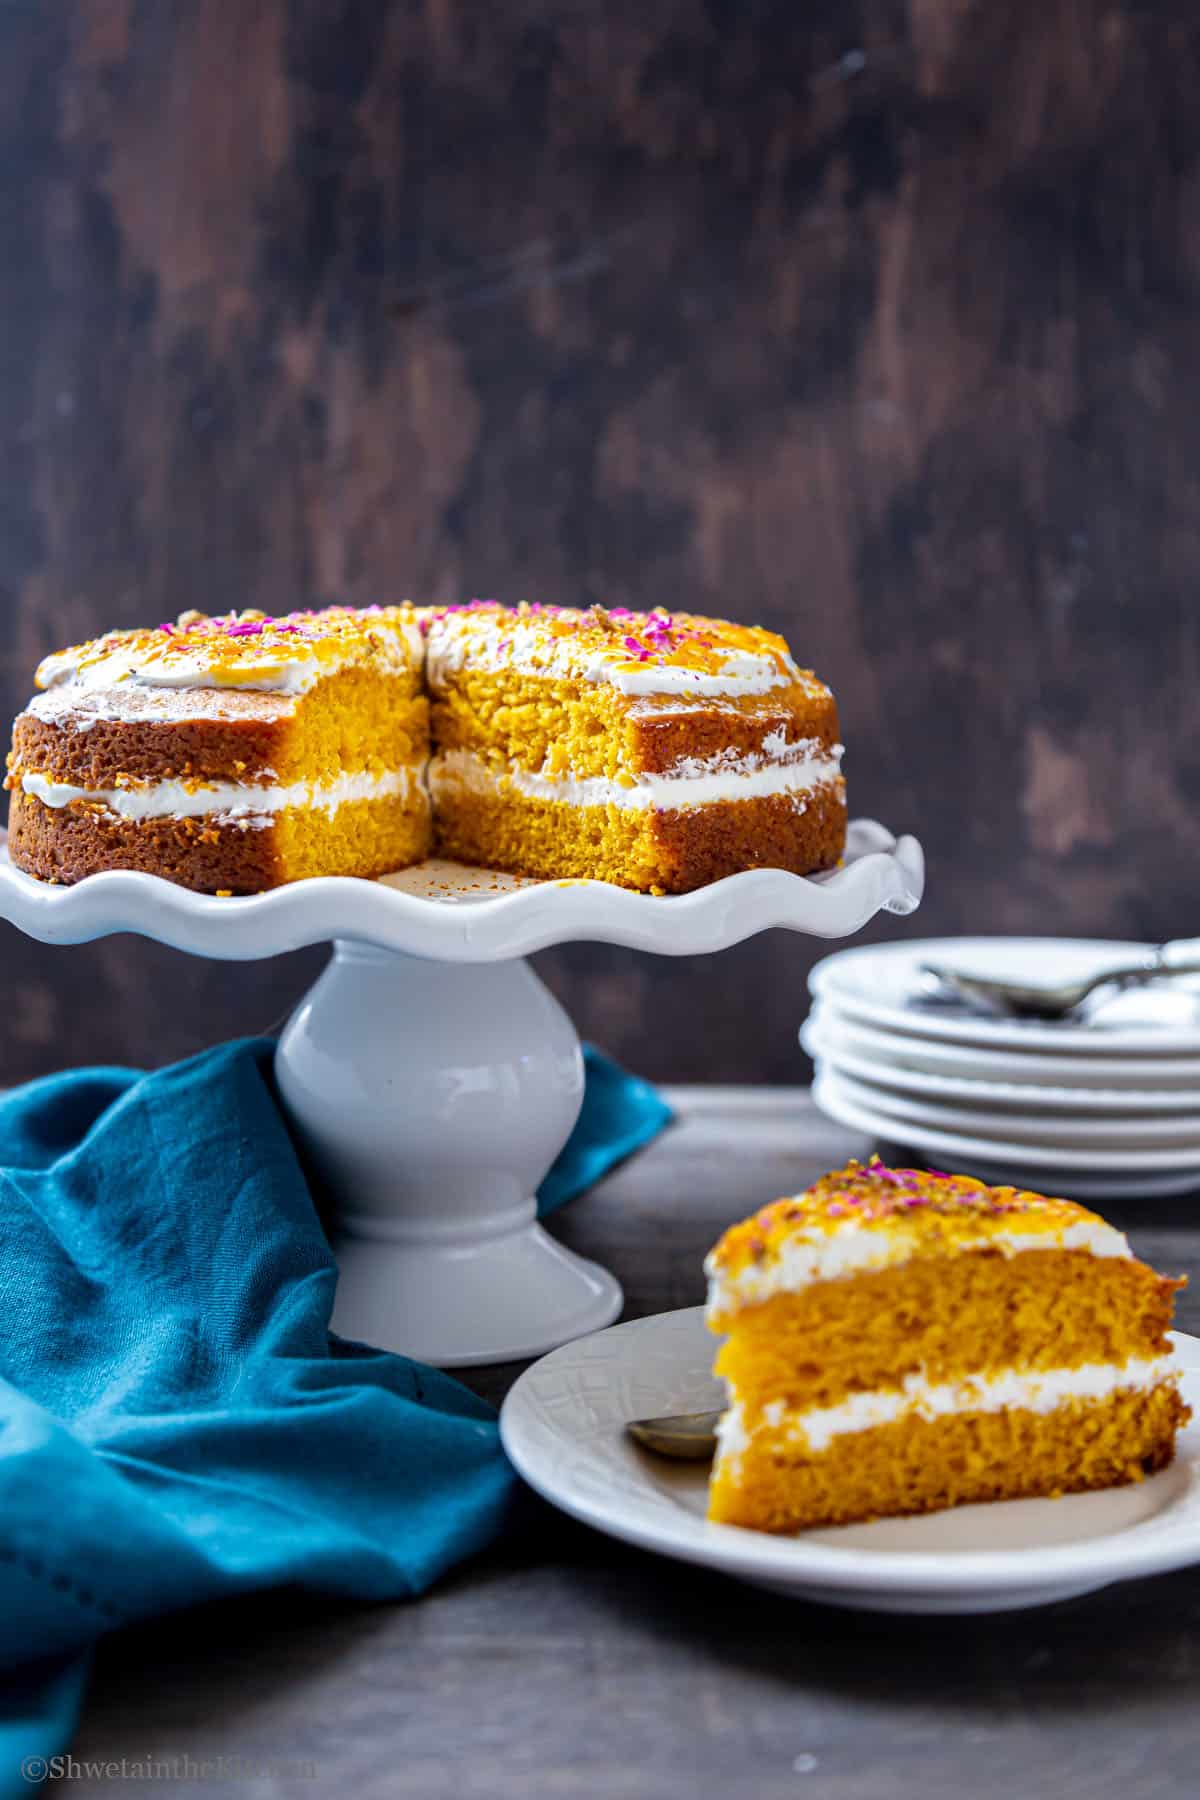 Front view of Mango cake placed on a cake stand with slice cut and placed on a plate